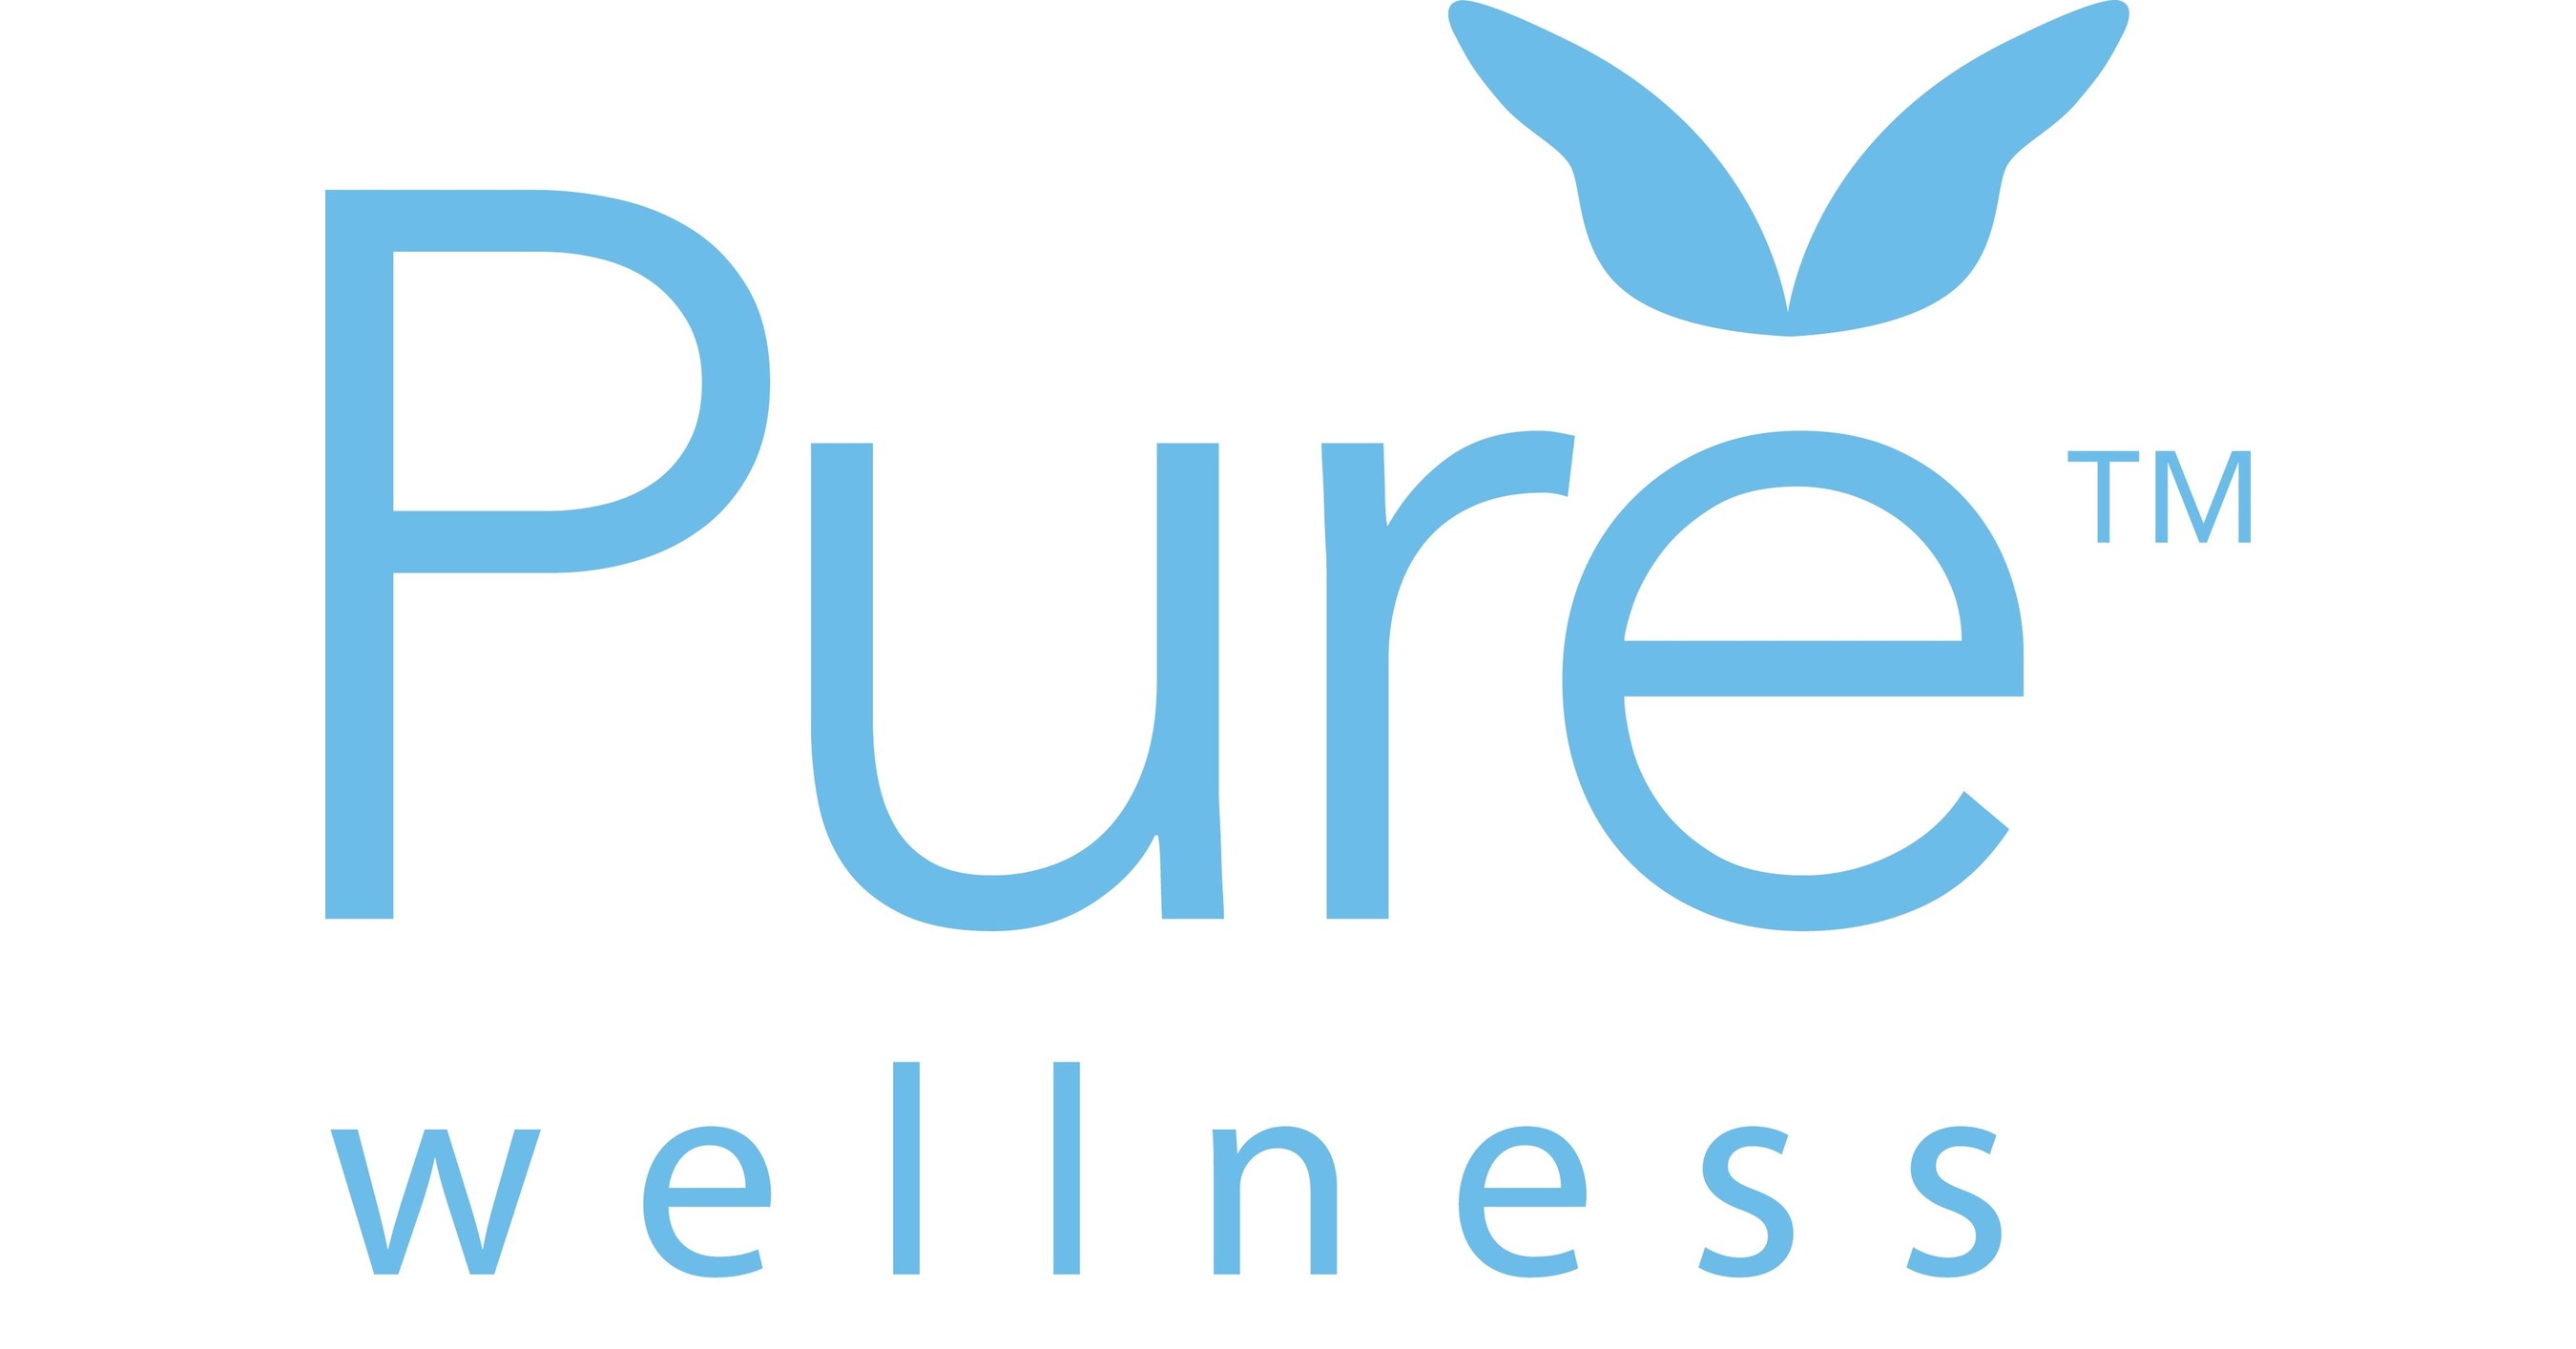 Wellness Business to Reclaim Their Well-Being